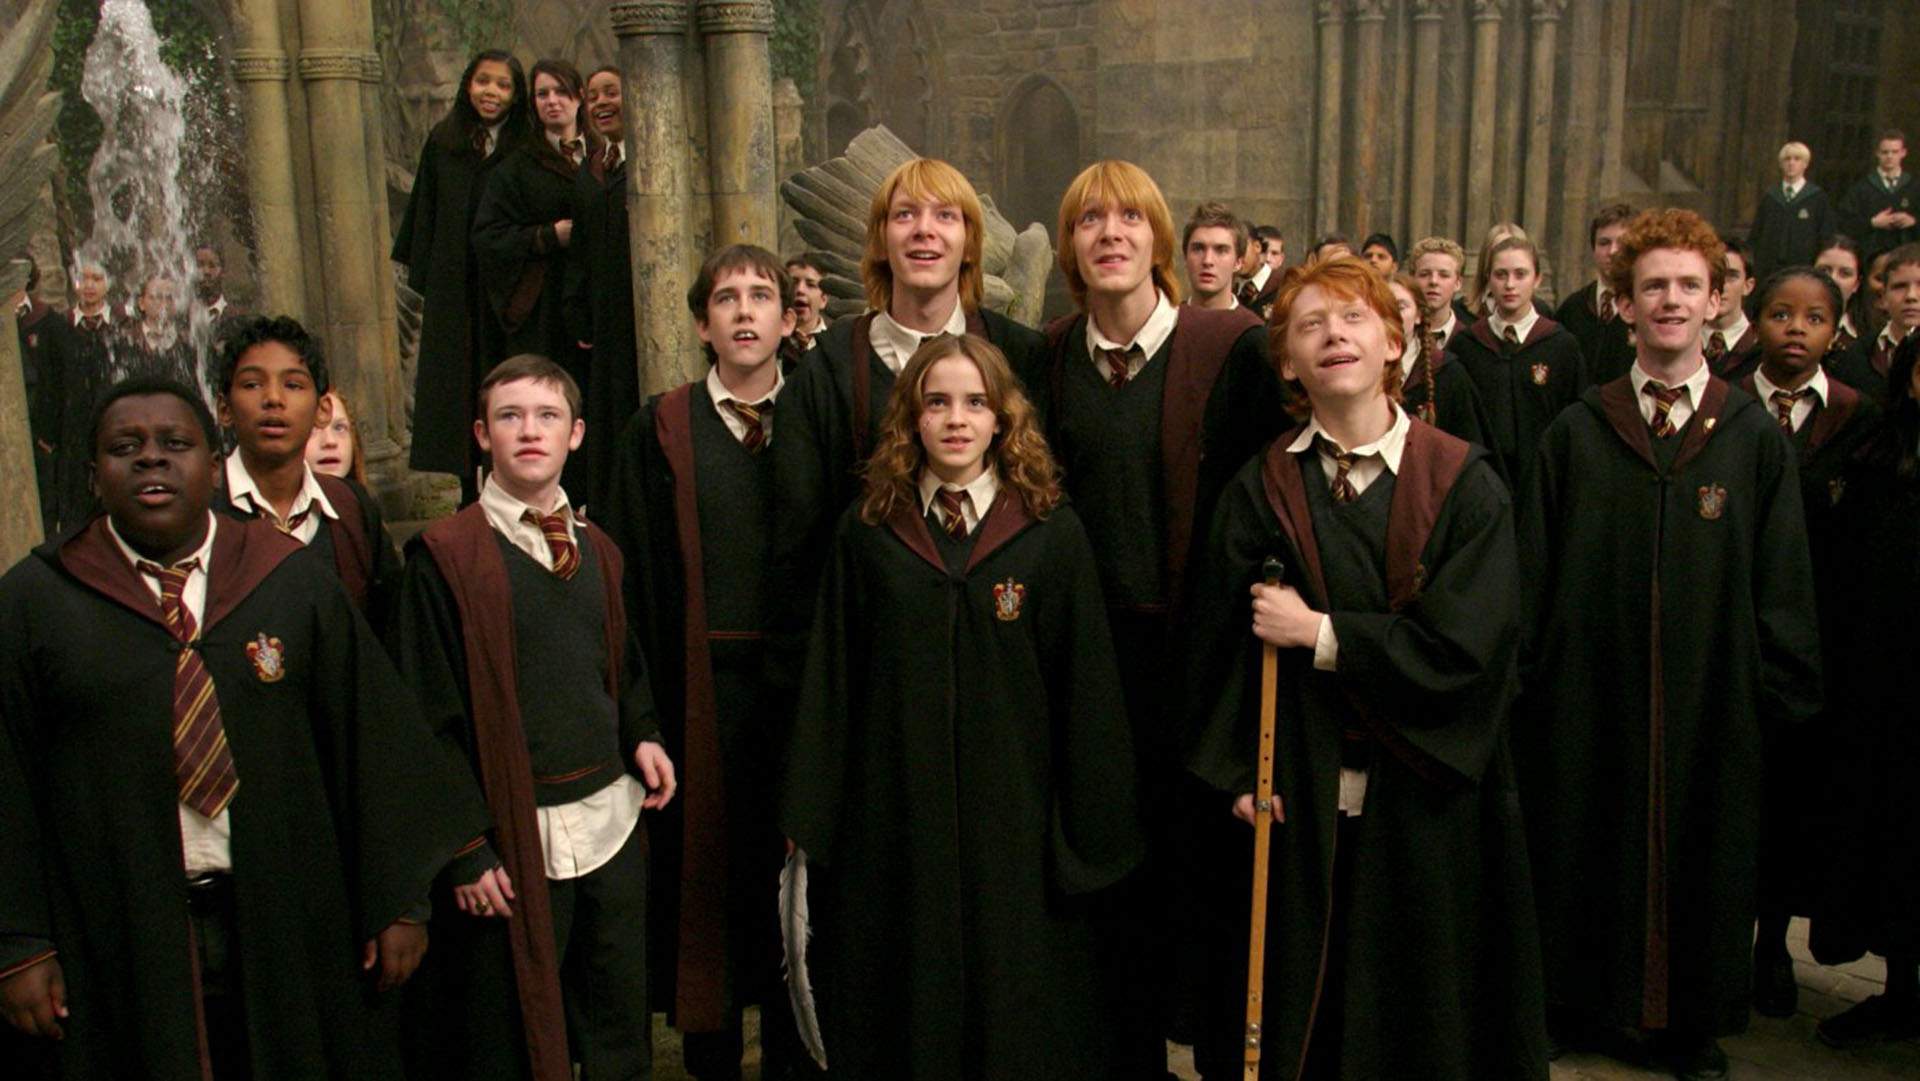 This New Harry Potter Tour Lets You Dress Up in Authentic Hogwarts Robes